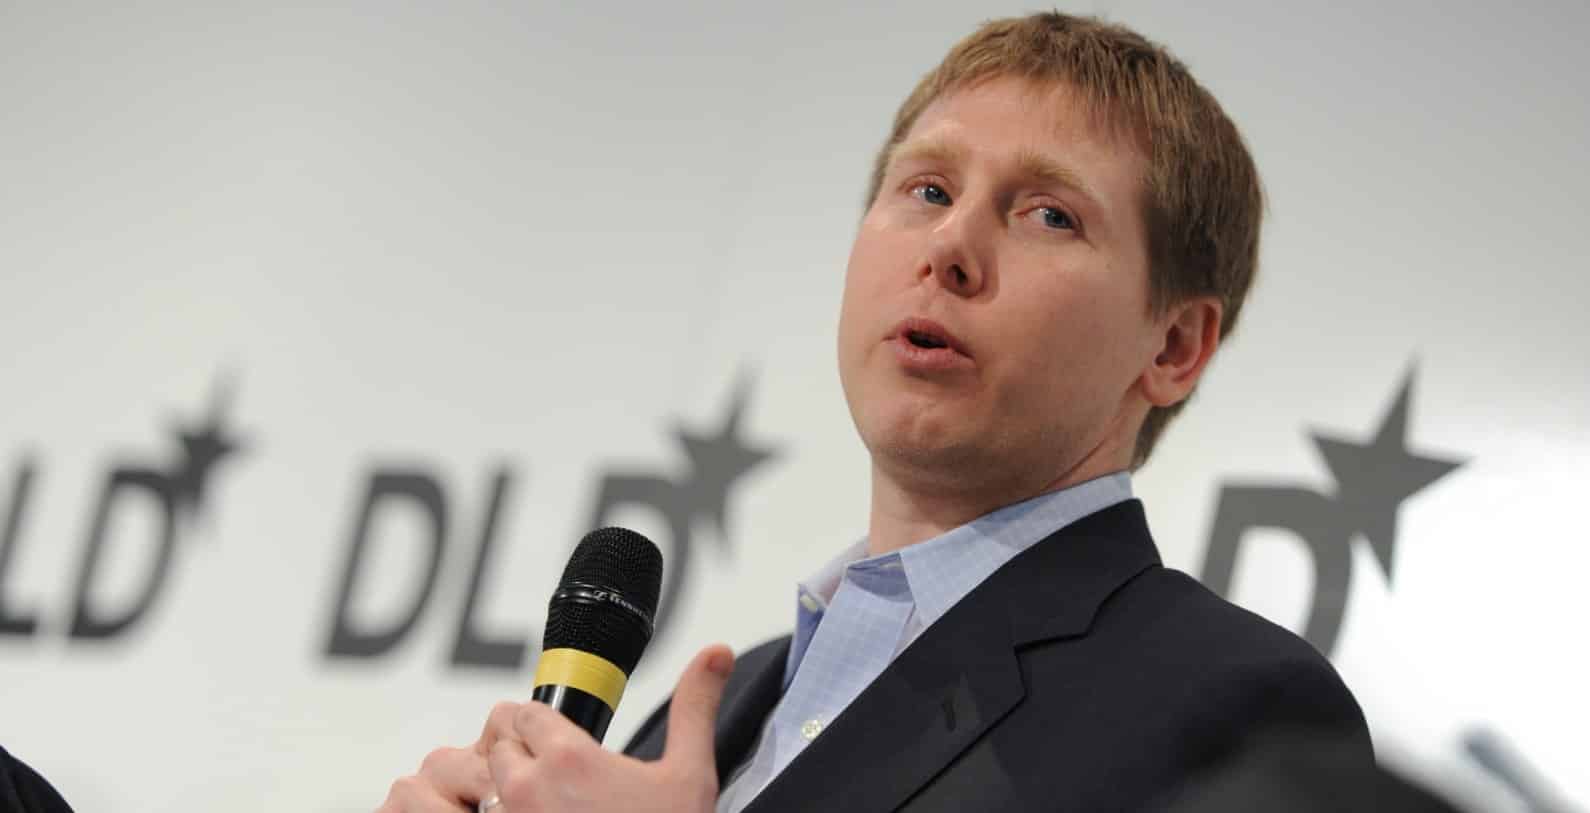 Barry Silbert Purchases Fresh Altcoins